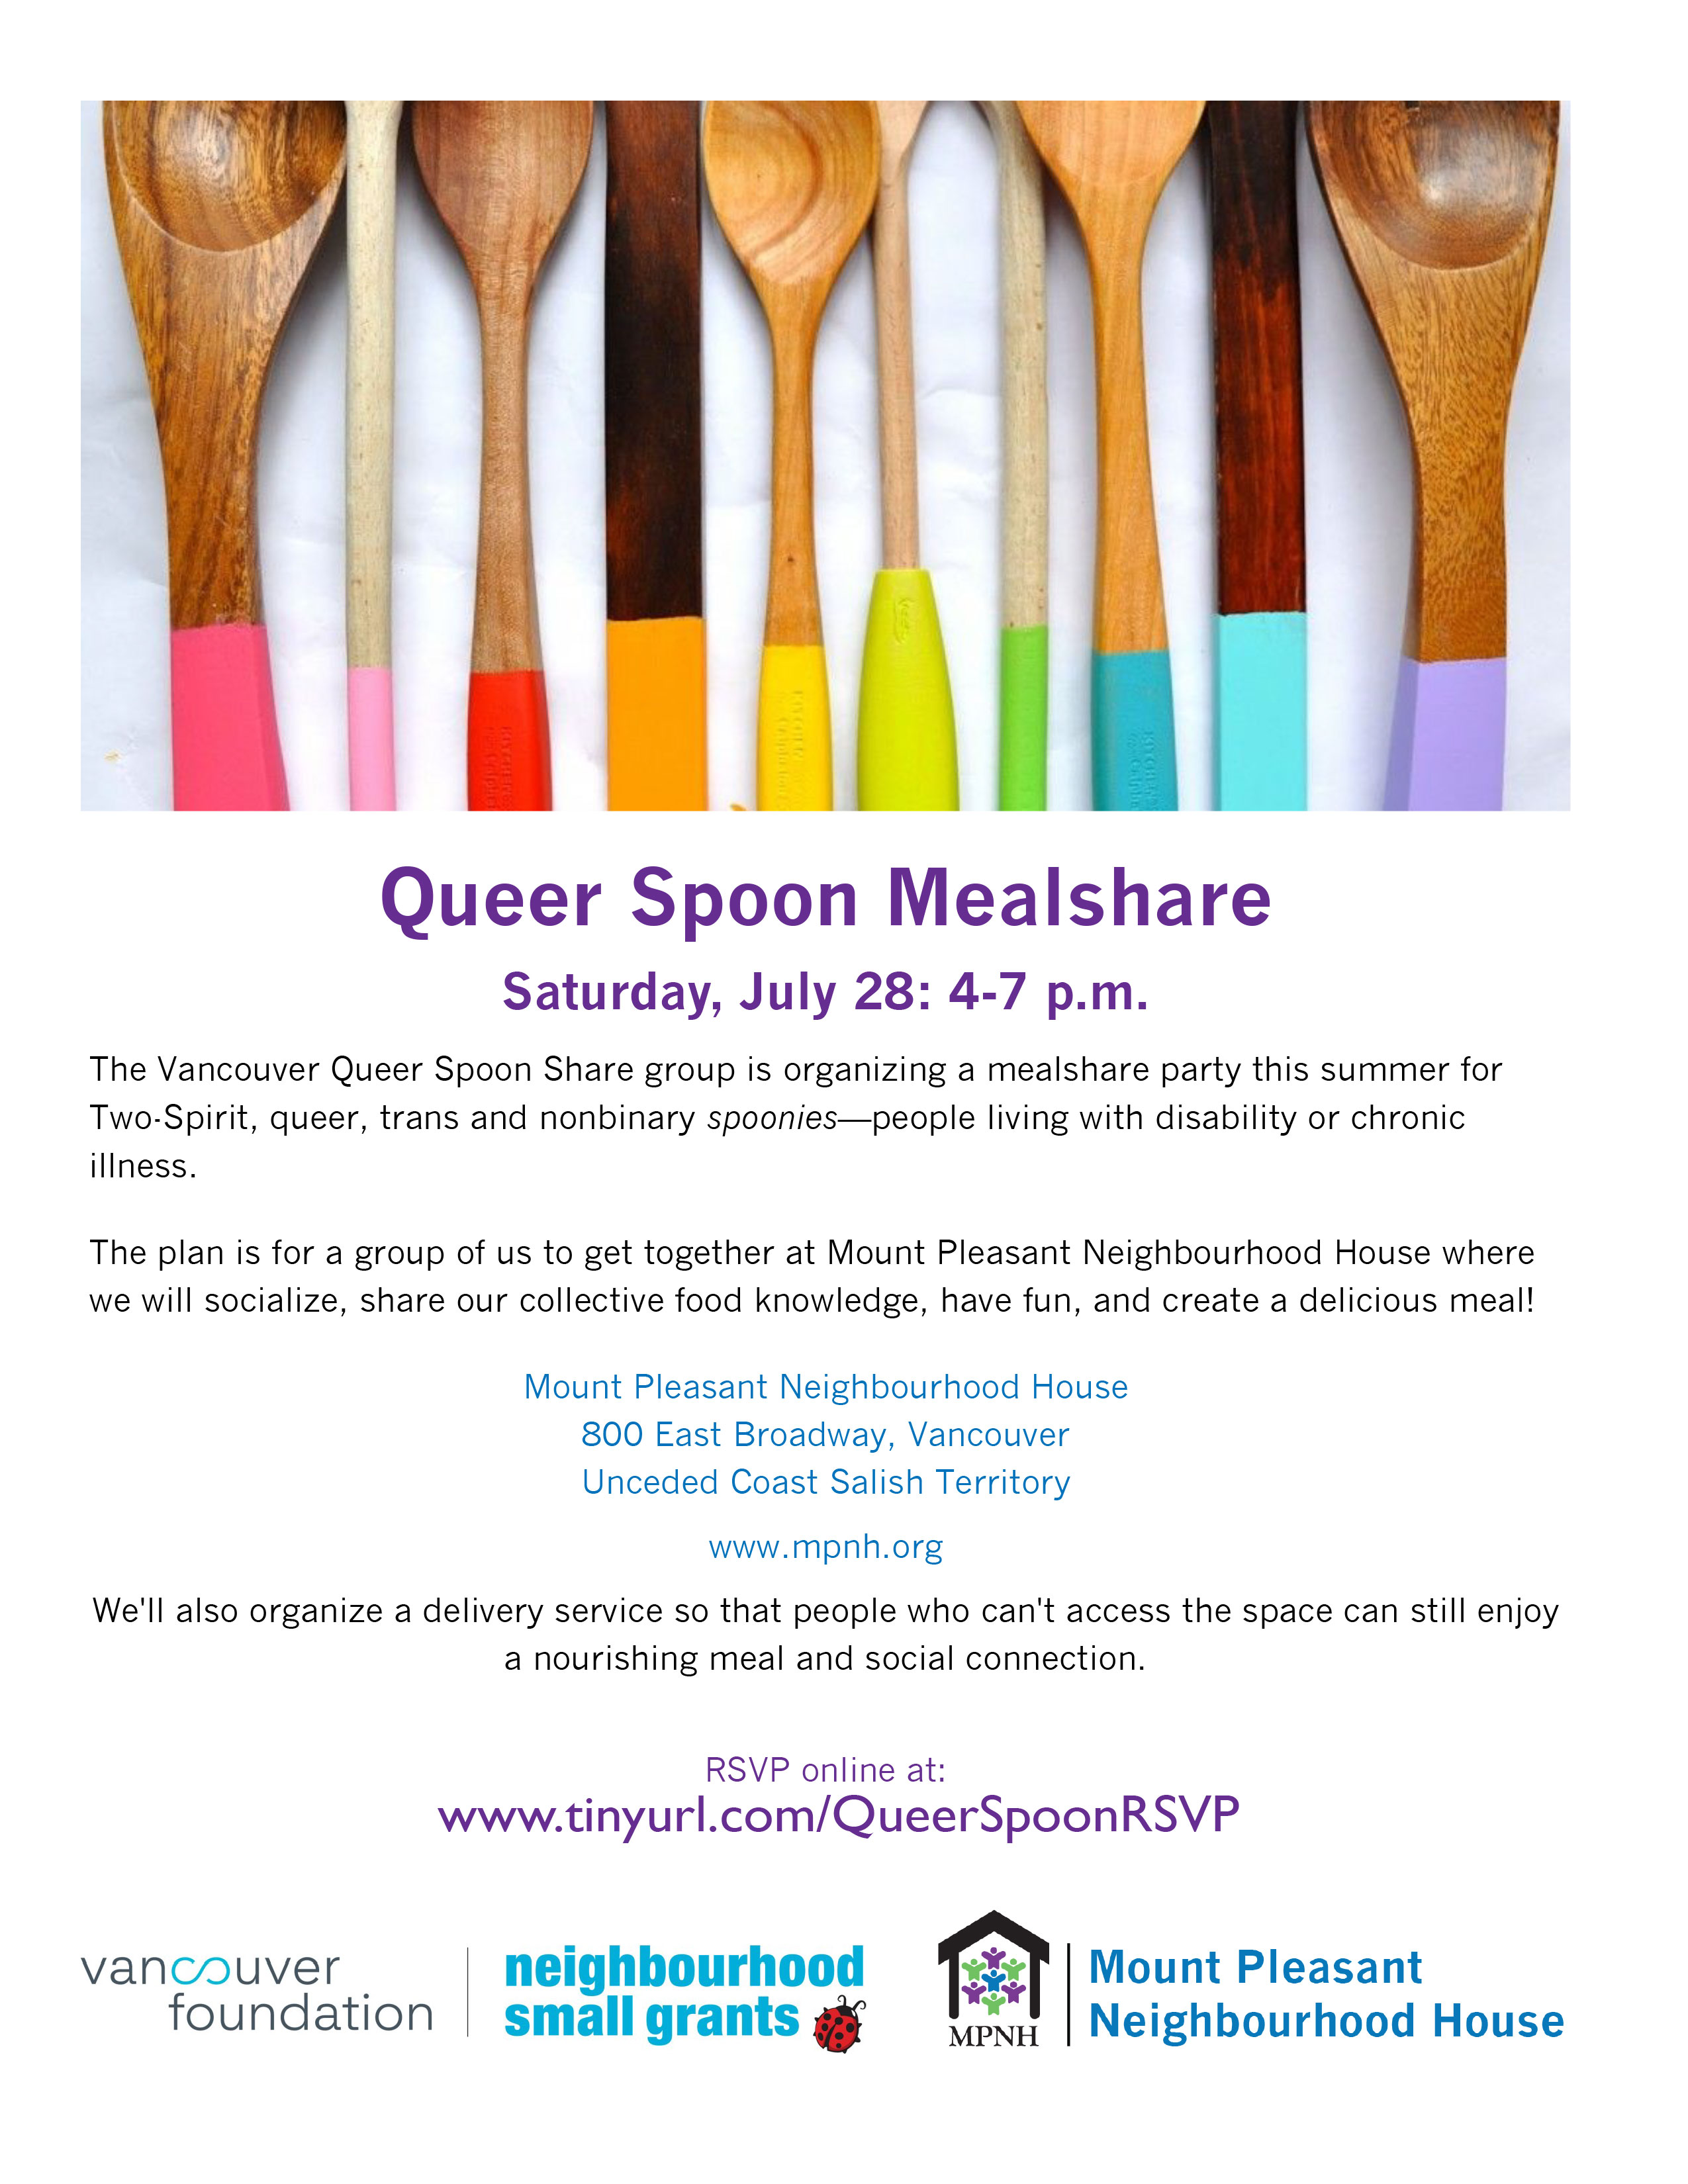 This image shows a poster with the same text included in this calendar event posting, and a picture of wooden spoons of varying styles and rainbow coloured handles